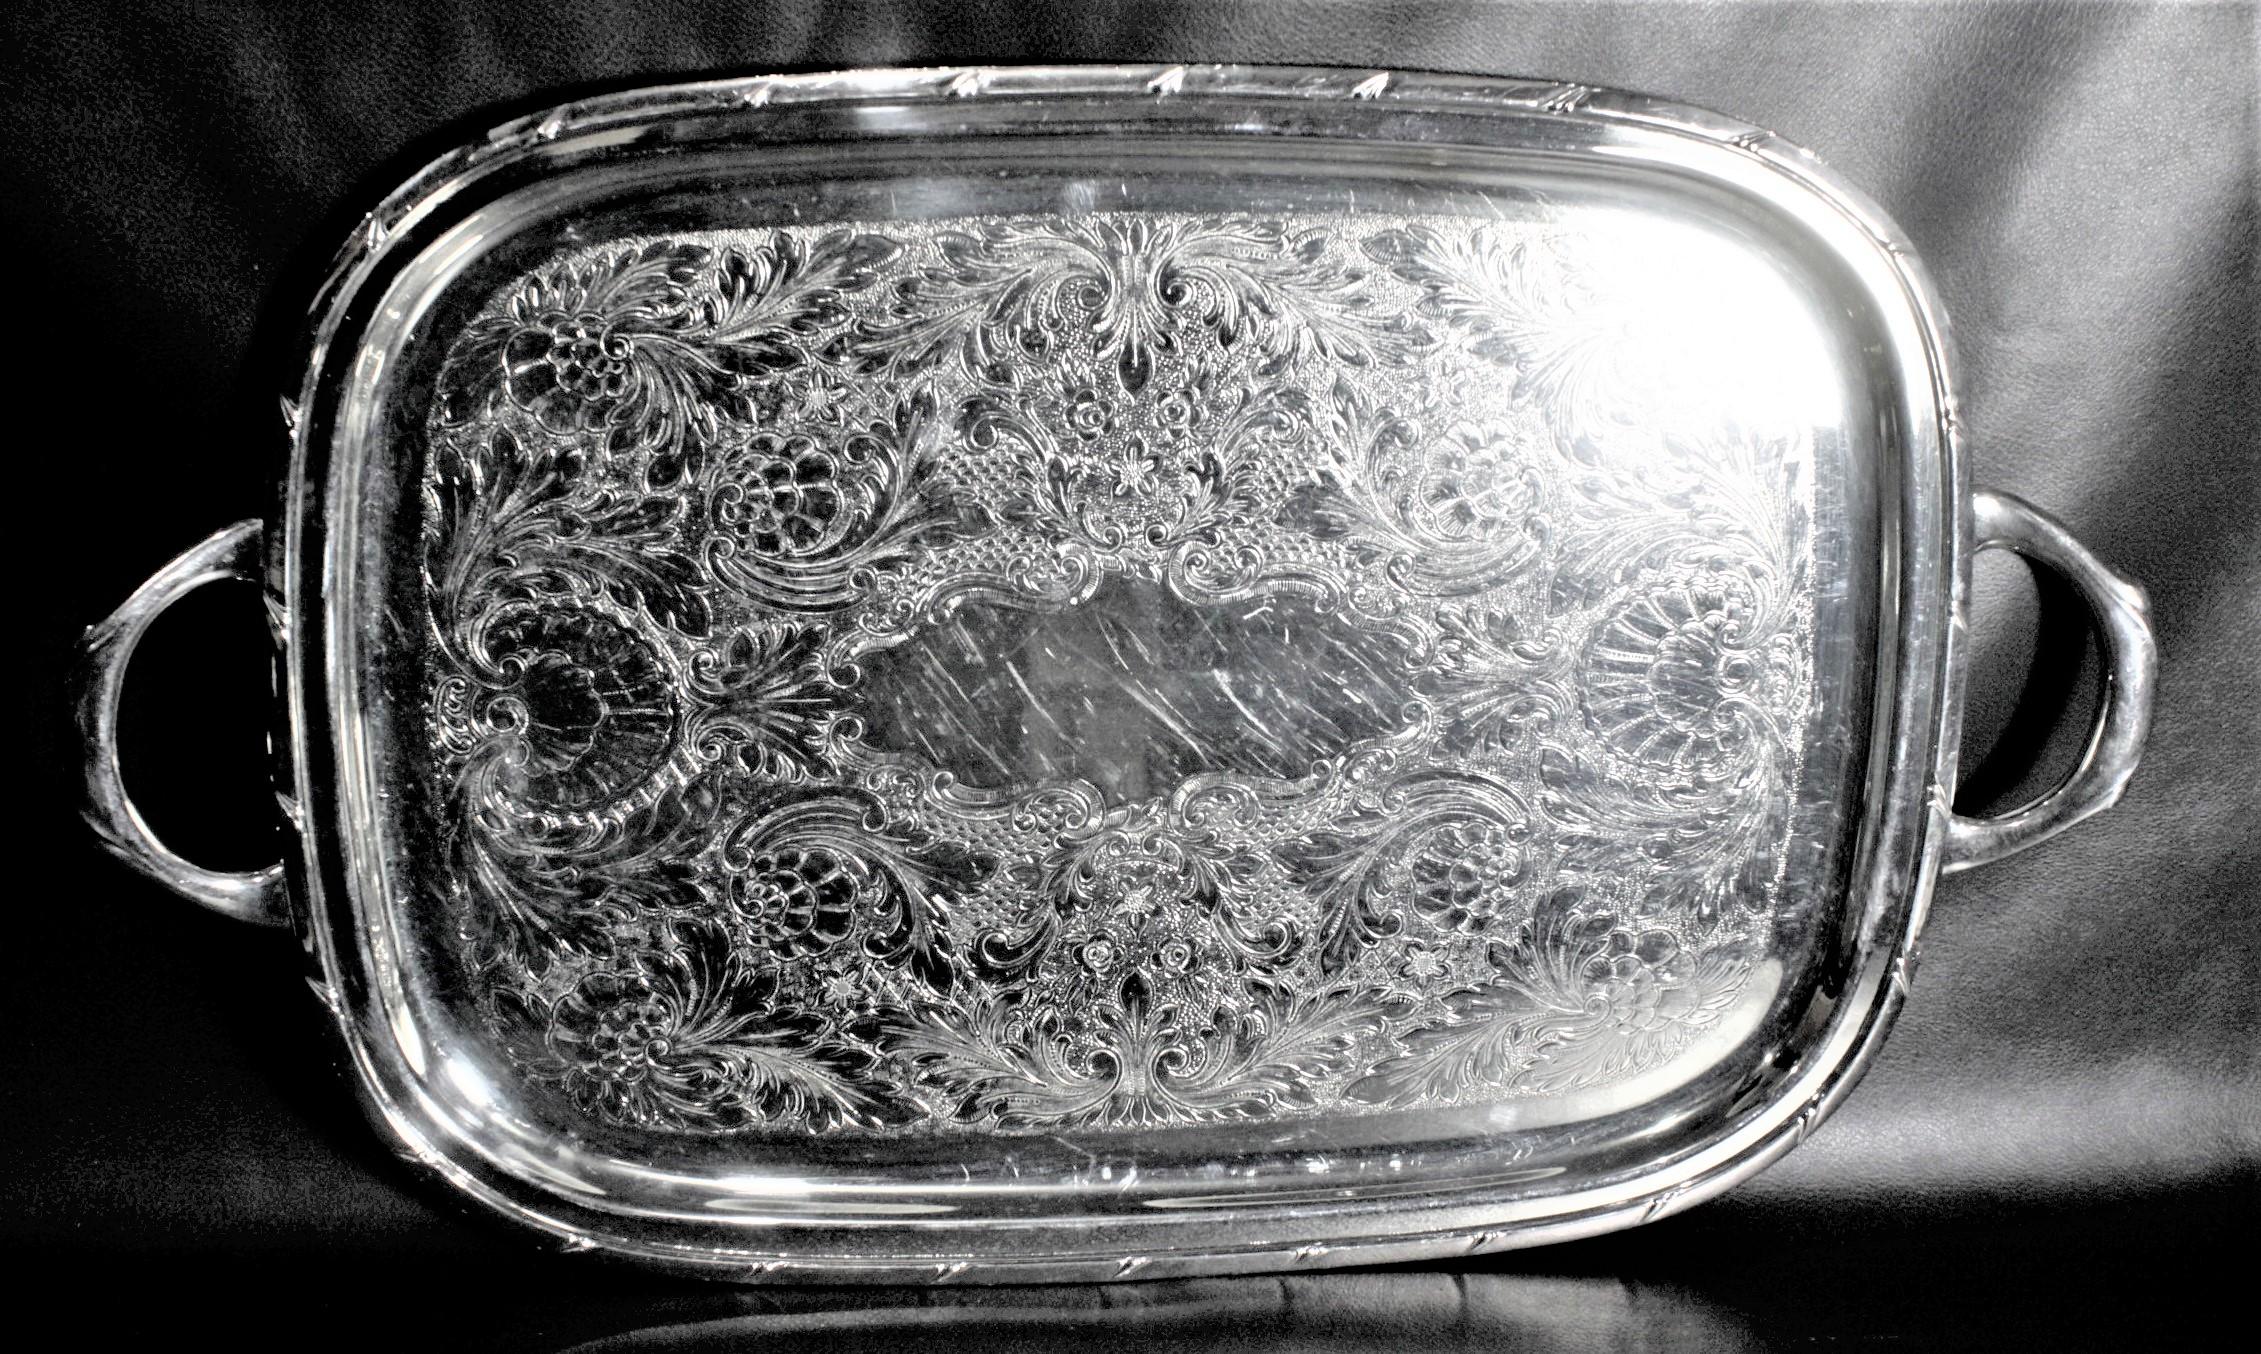 Canadian Rogers Antique Styled Silver Plated Engraved Serving Tray For Sale